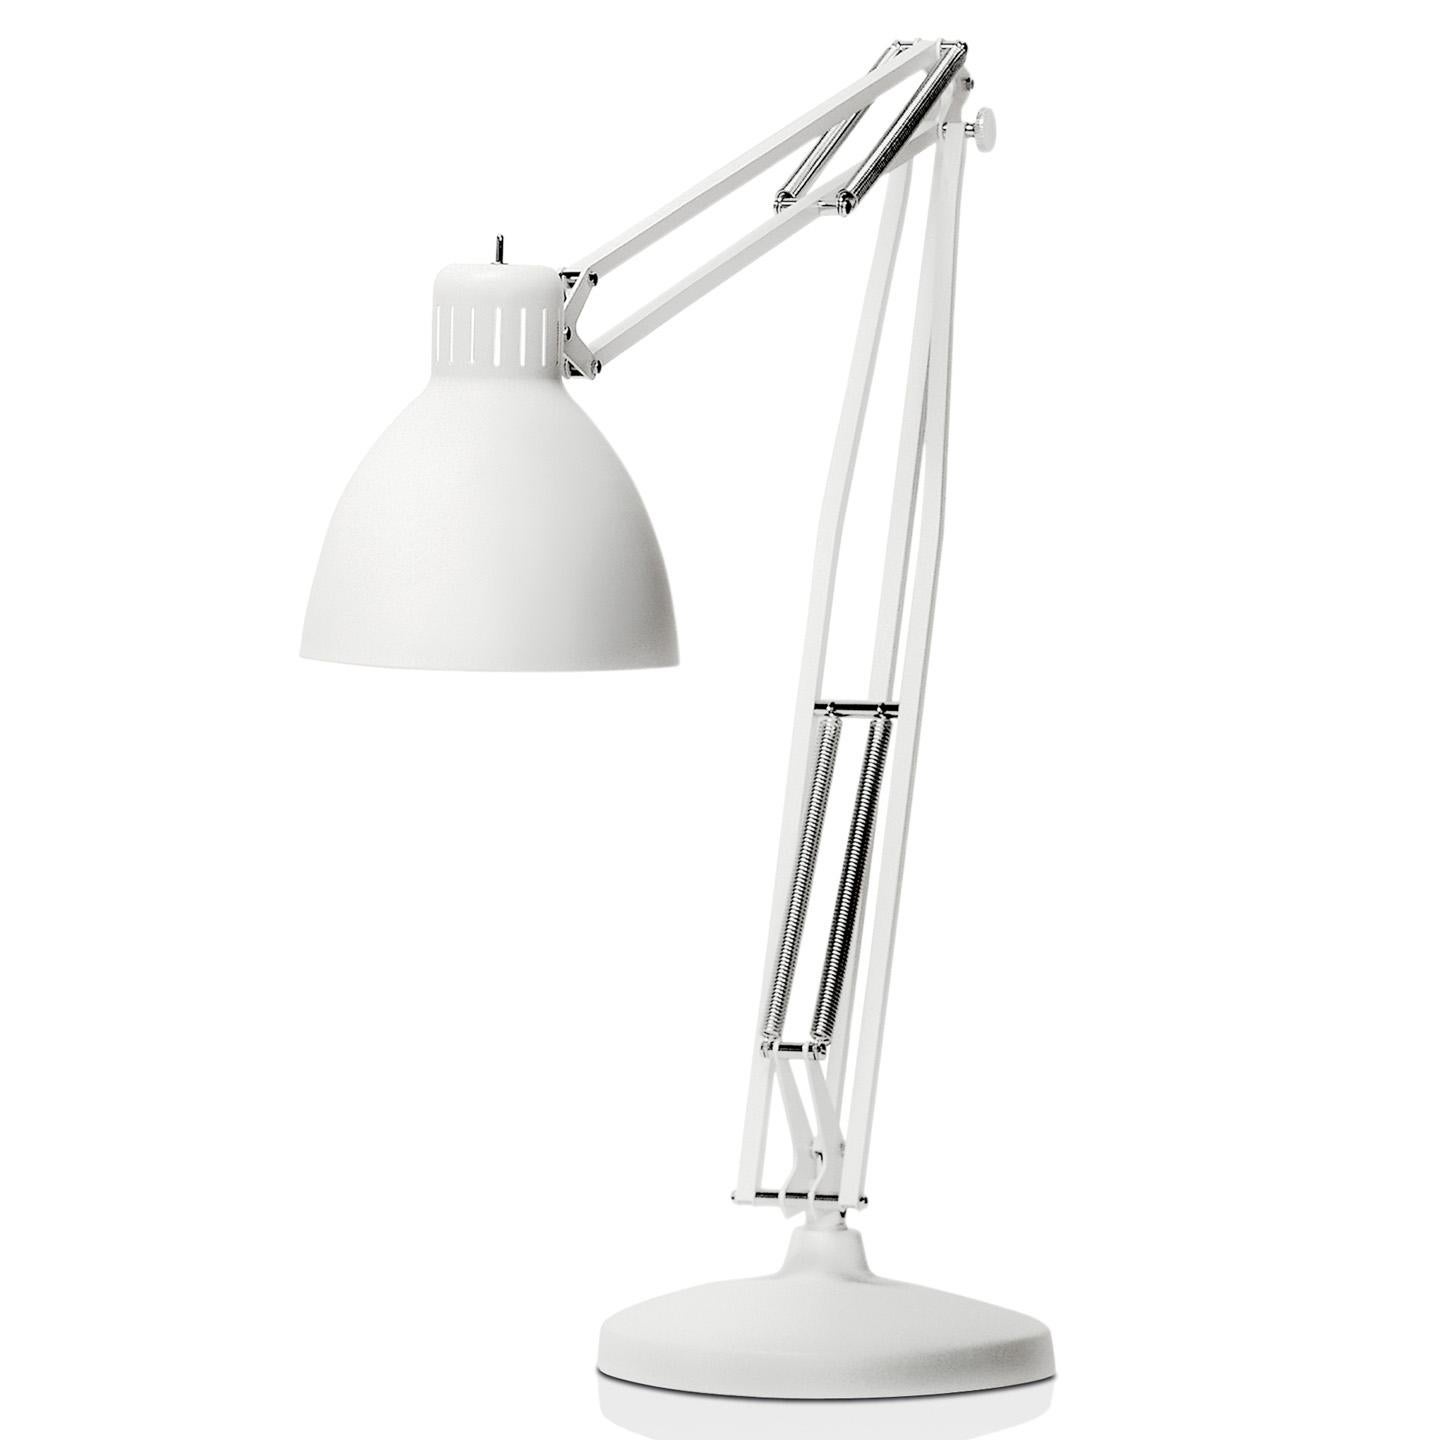 The Great JJ outdoor floor lamp updates the original Jac Jacobsen L-1 architect desk lamp (1937) for contemporary use. The 2009 refresh of this iconic design is a clever play on scale that turns a simple Classic task lamp into a bold statement piece